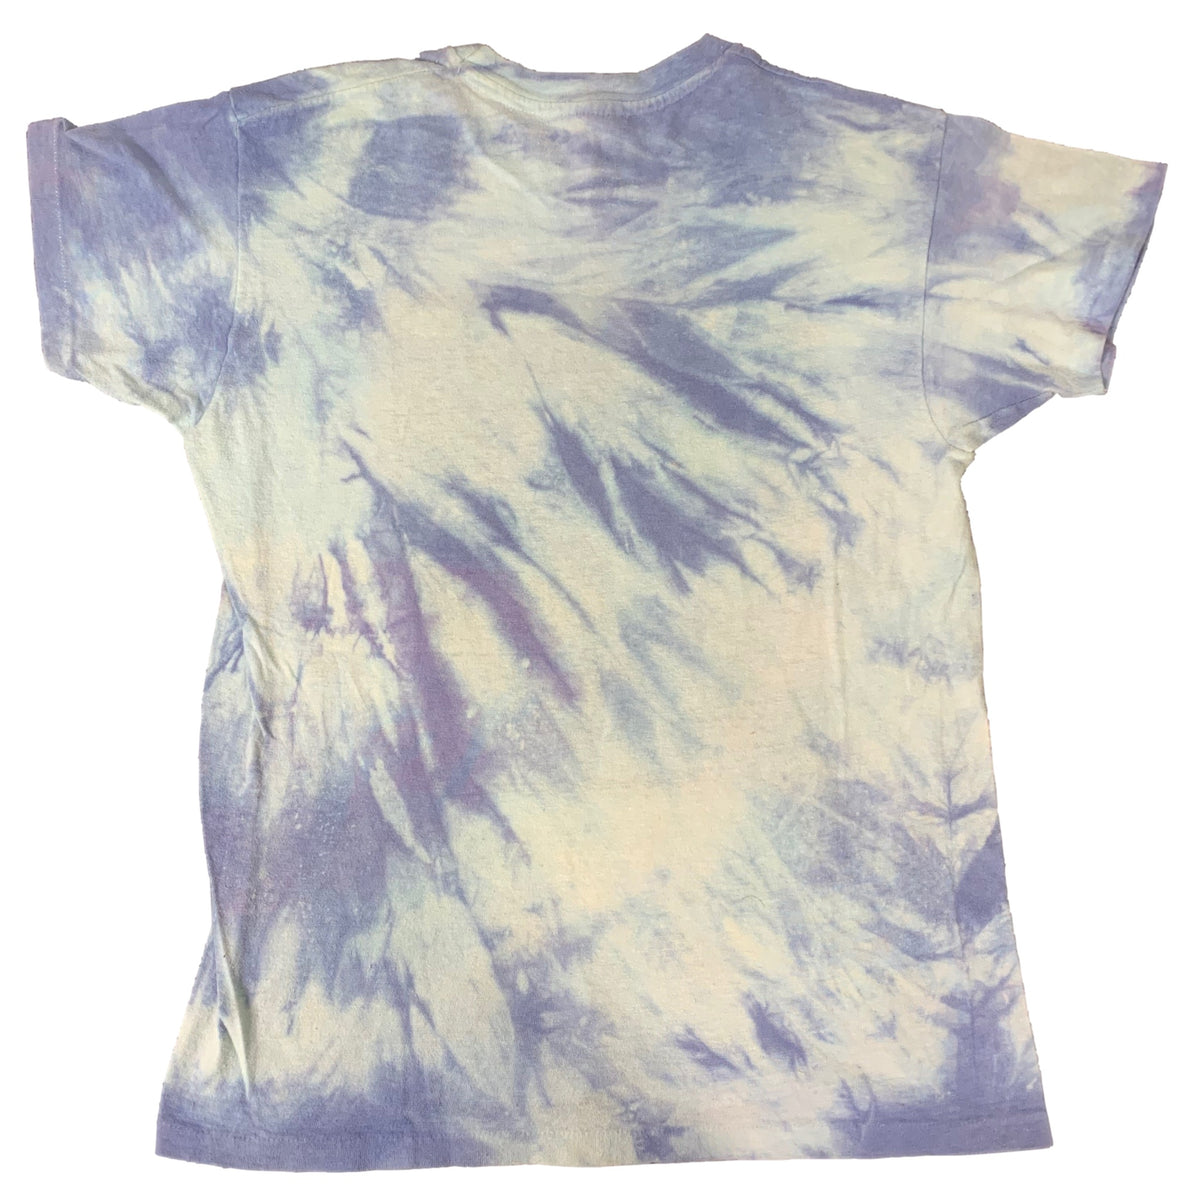 Vintage Jeff Beck &quot;Wired&quot; Tie Dye T-Shirt - jointcustodydc